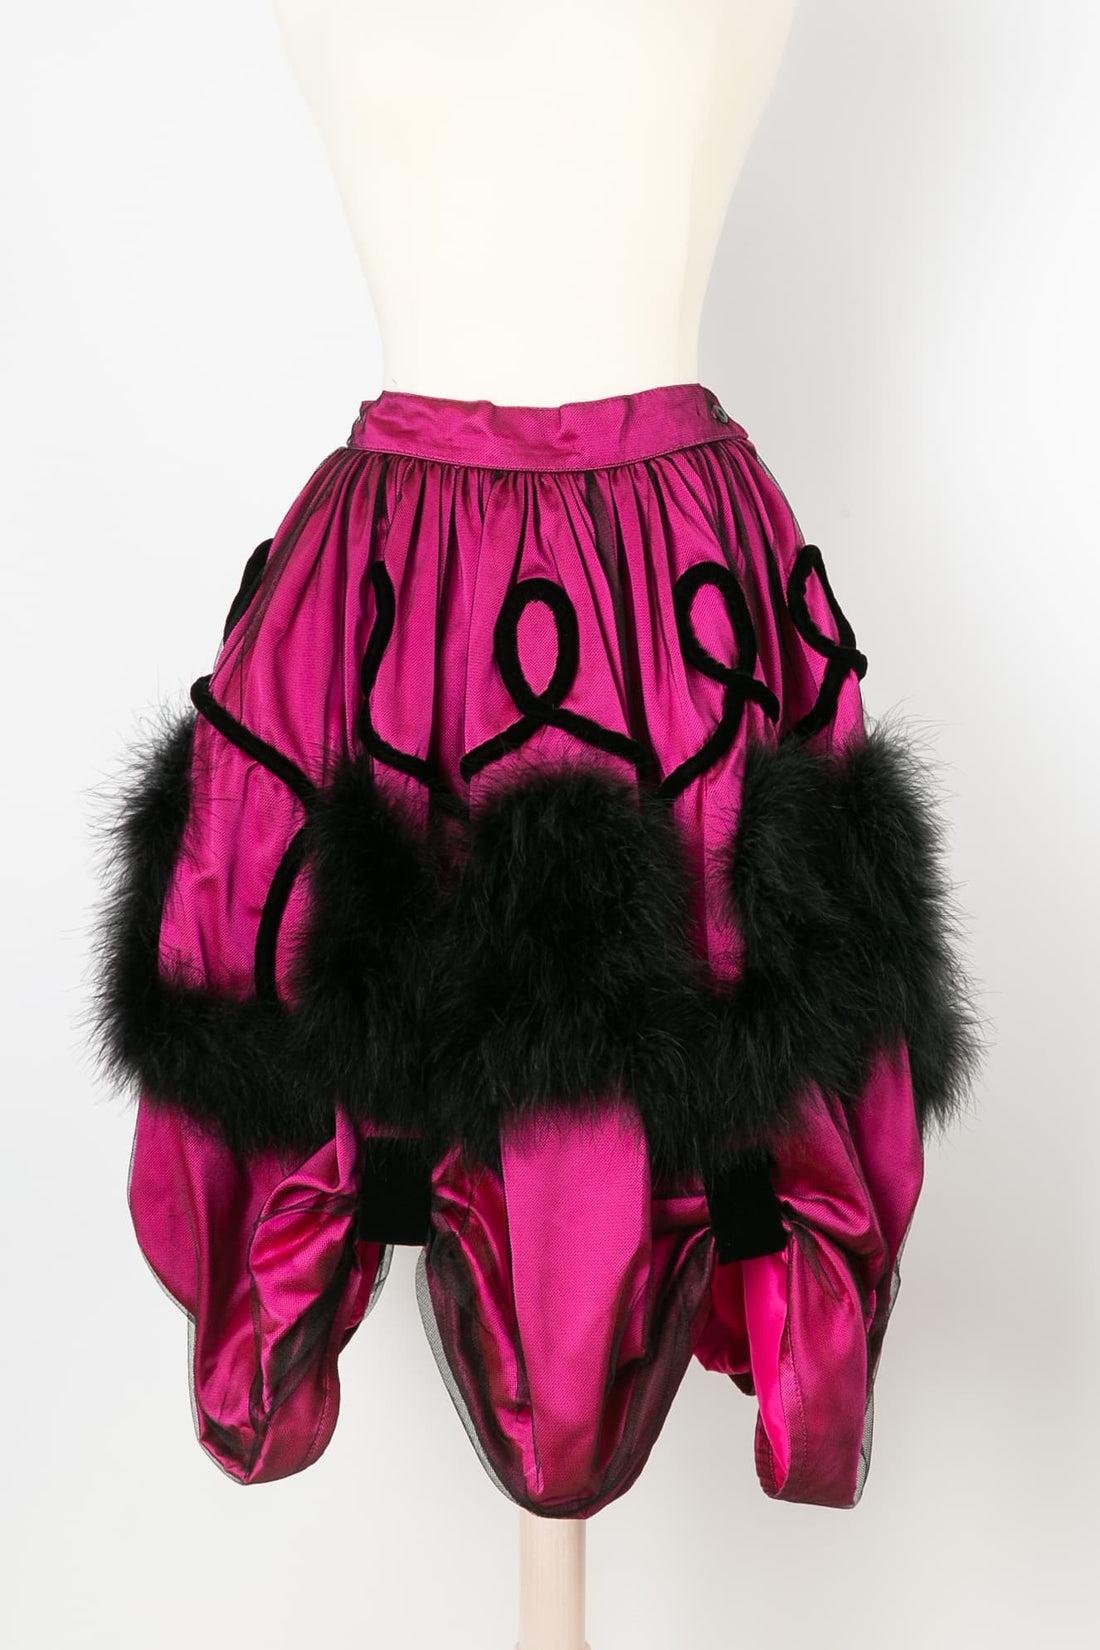 Chantal Thomass Marabou and Black Lace Fashion Show Outfit, 1988 For Sale 1